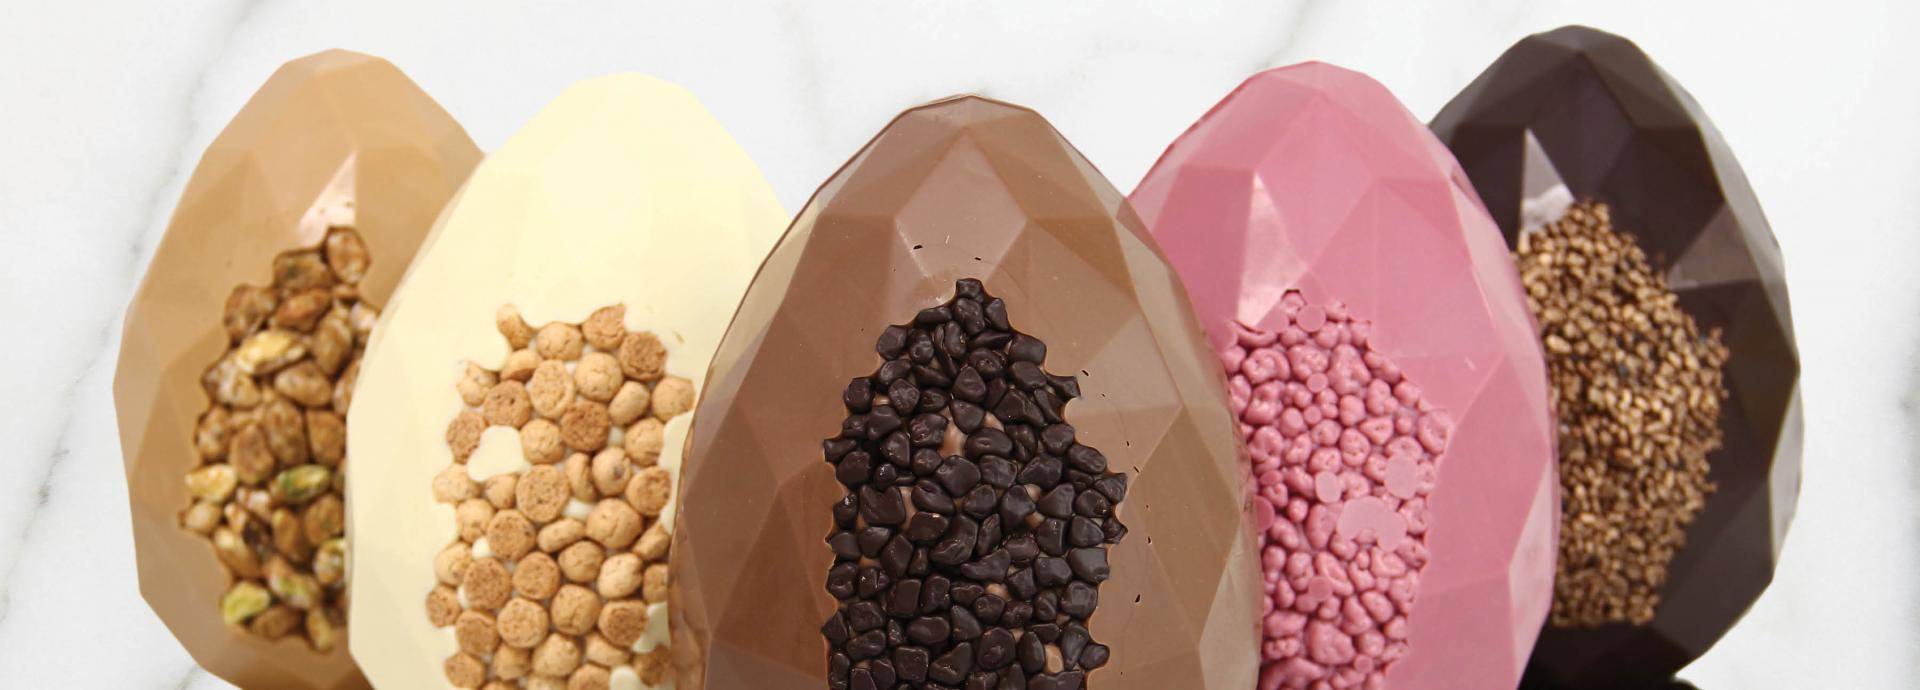 5 colors of chocolate: easter eggs